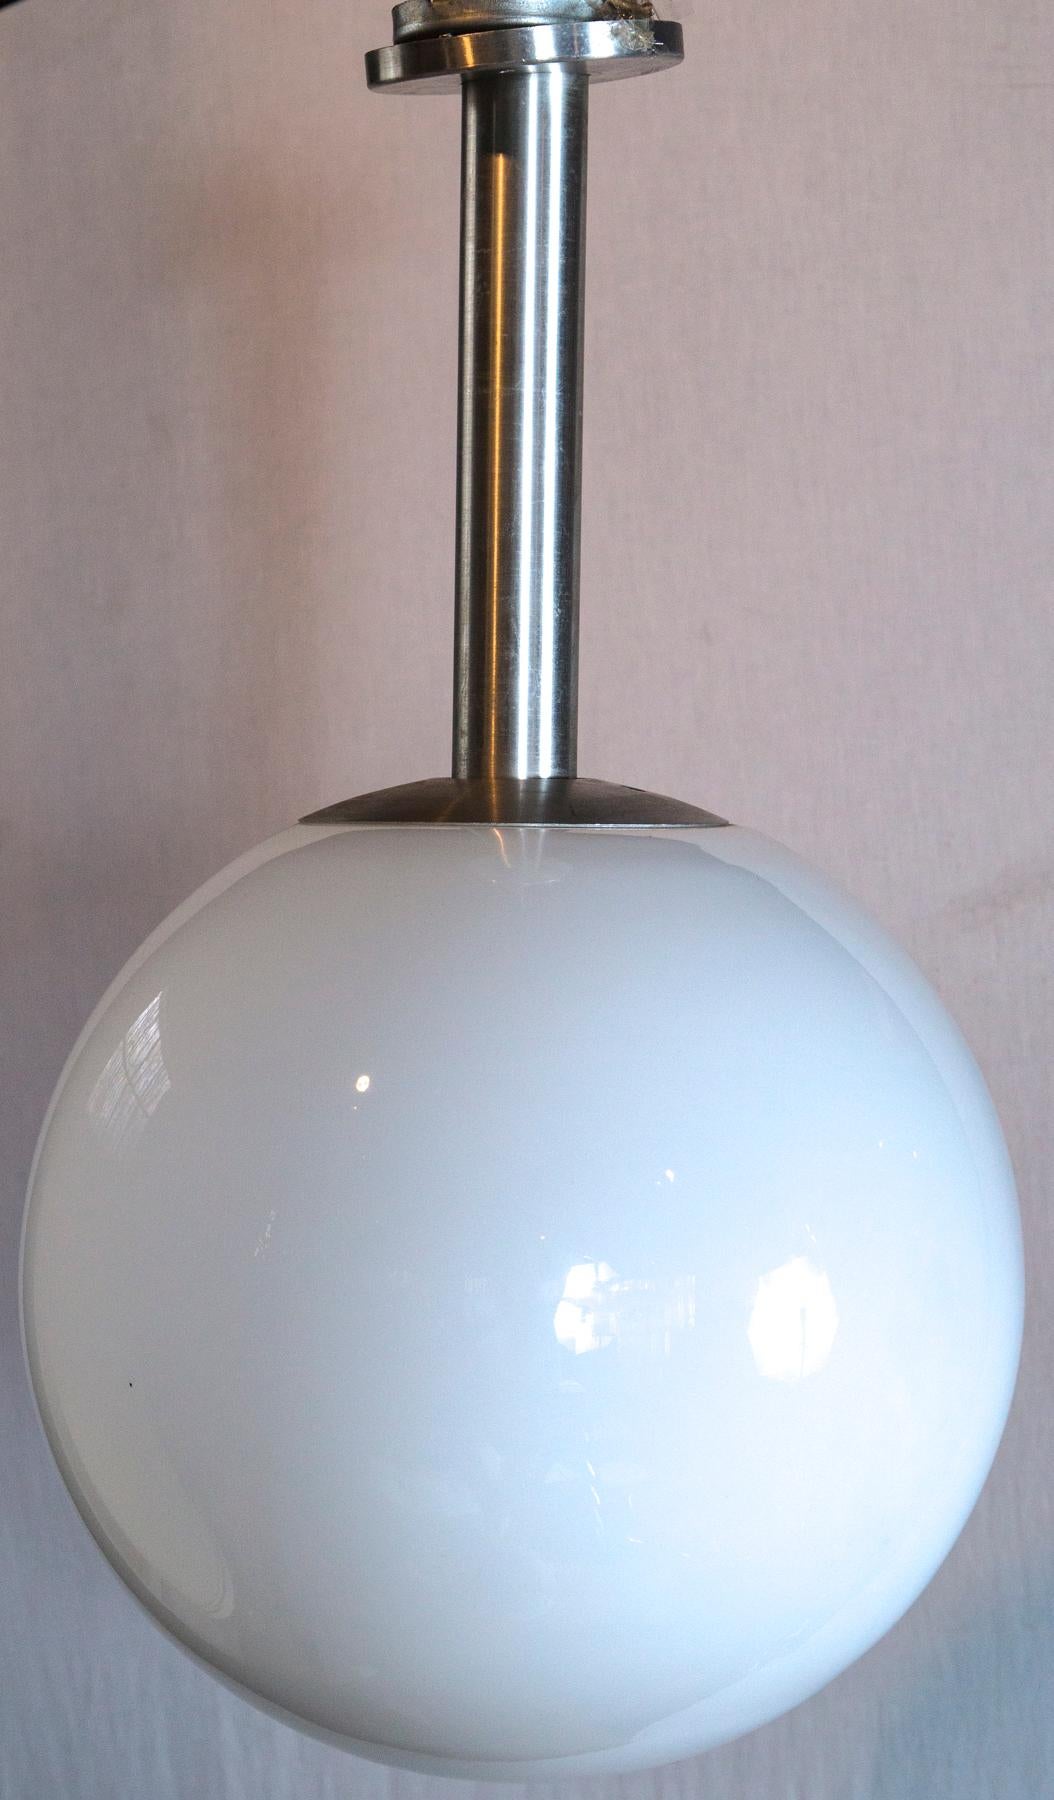 White glass globe pendant light with an aluminum stem. It accommodates one standard bulb.
Two pendant lights are available. Priced individually.